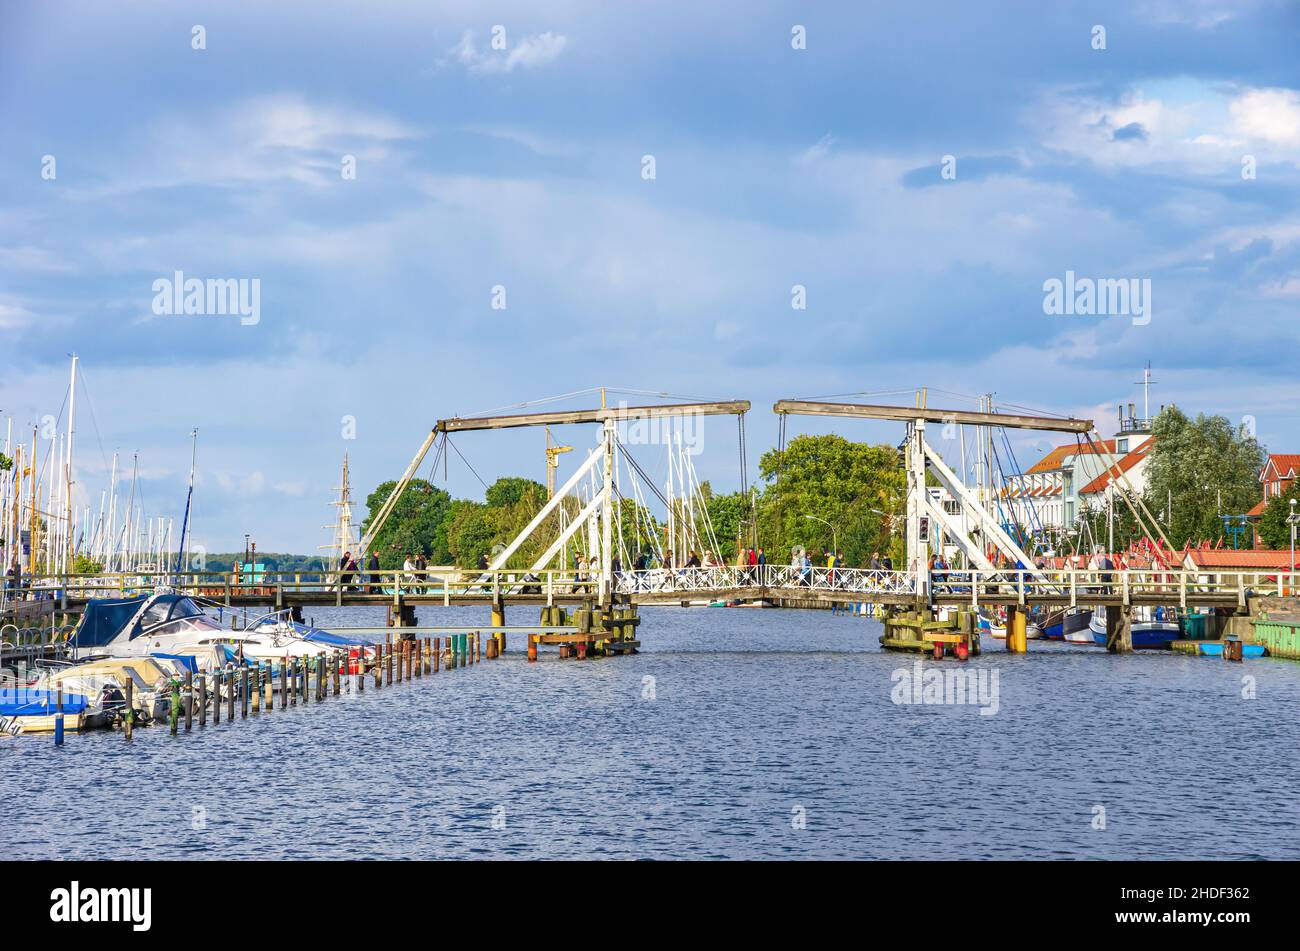 Picturesque view of the old Wieck wooden bascule bridge over the river Ryck, Greifswald-Wieck city harbour, Hanseatic City of Greifswald, Germany. Stock Photo